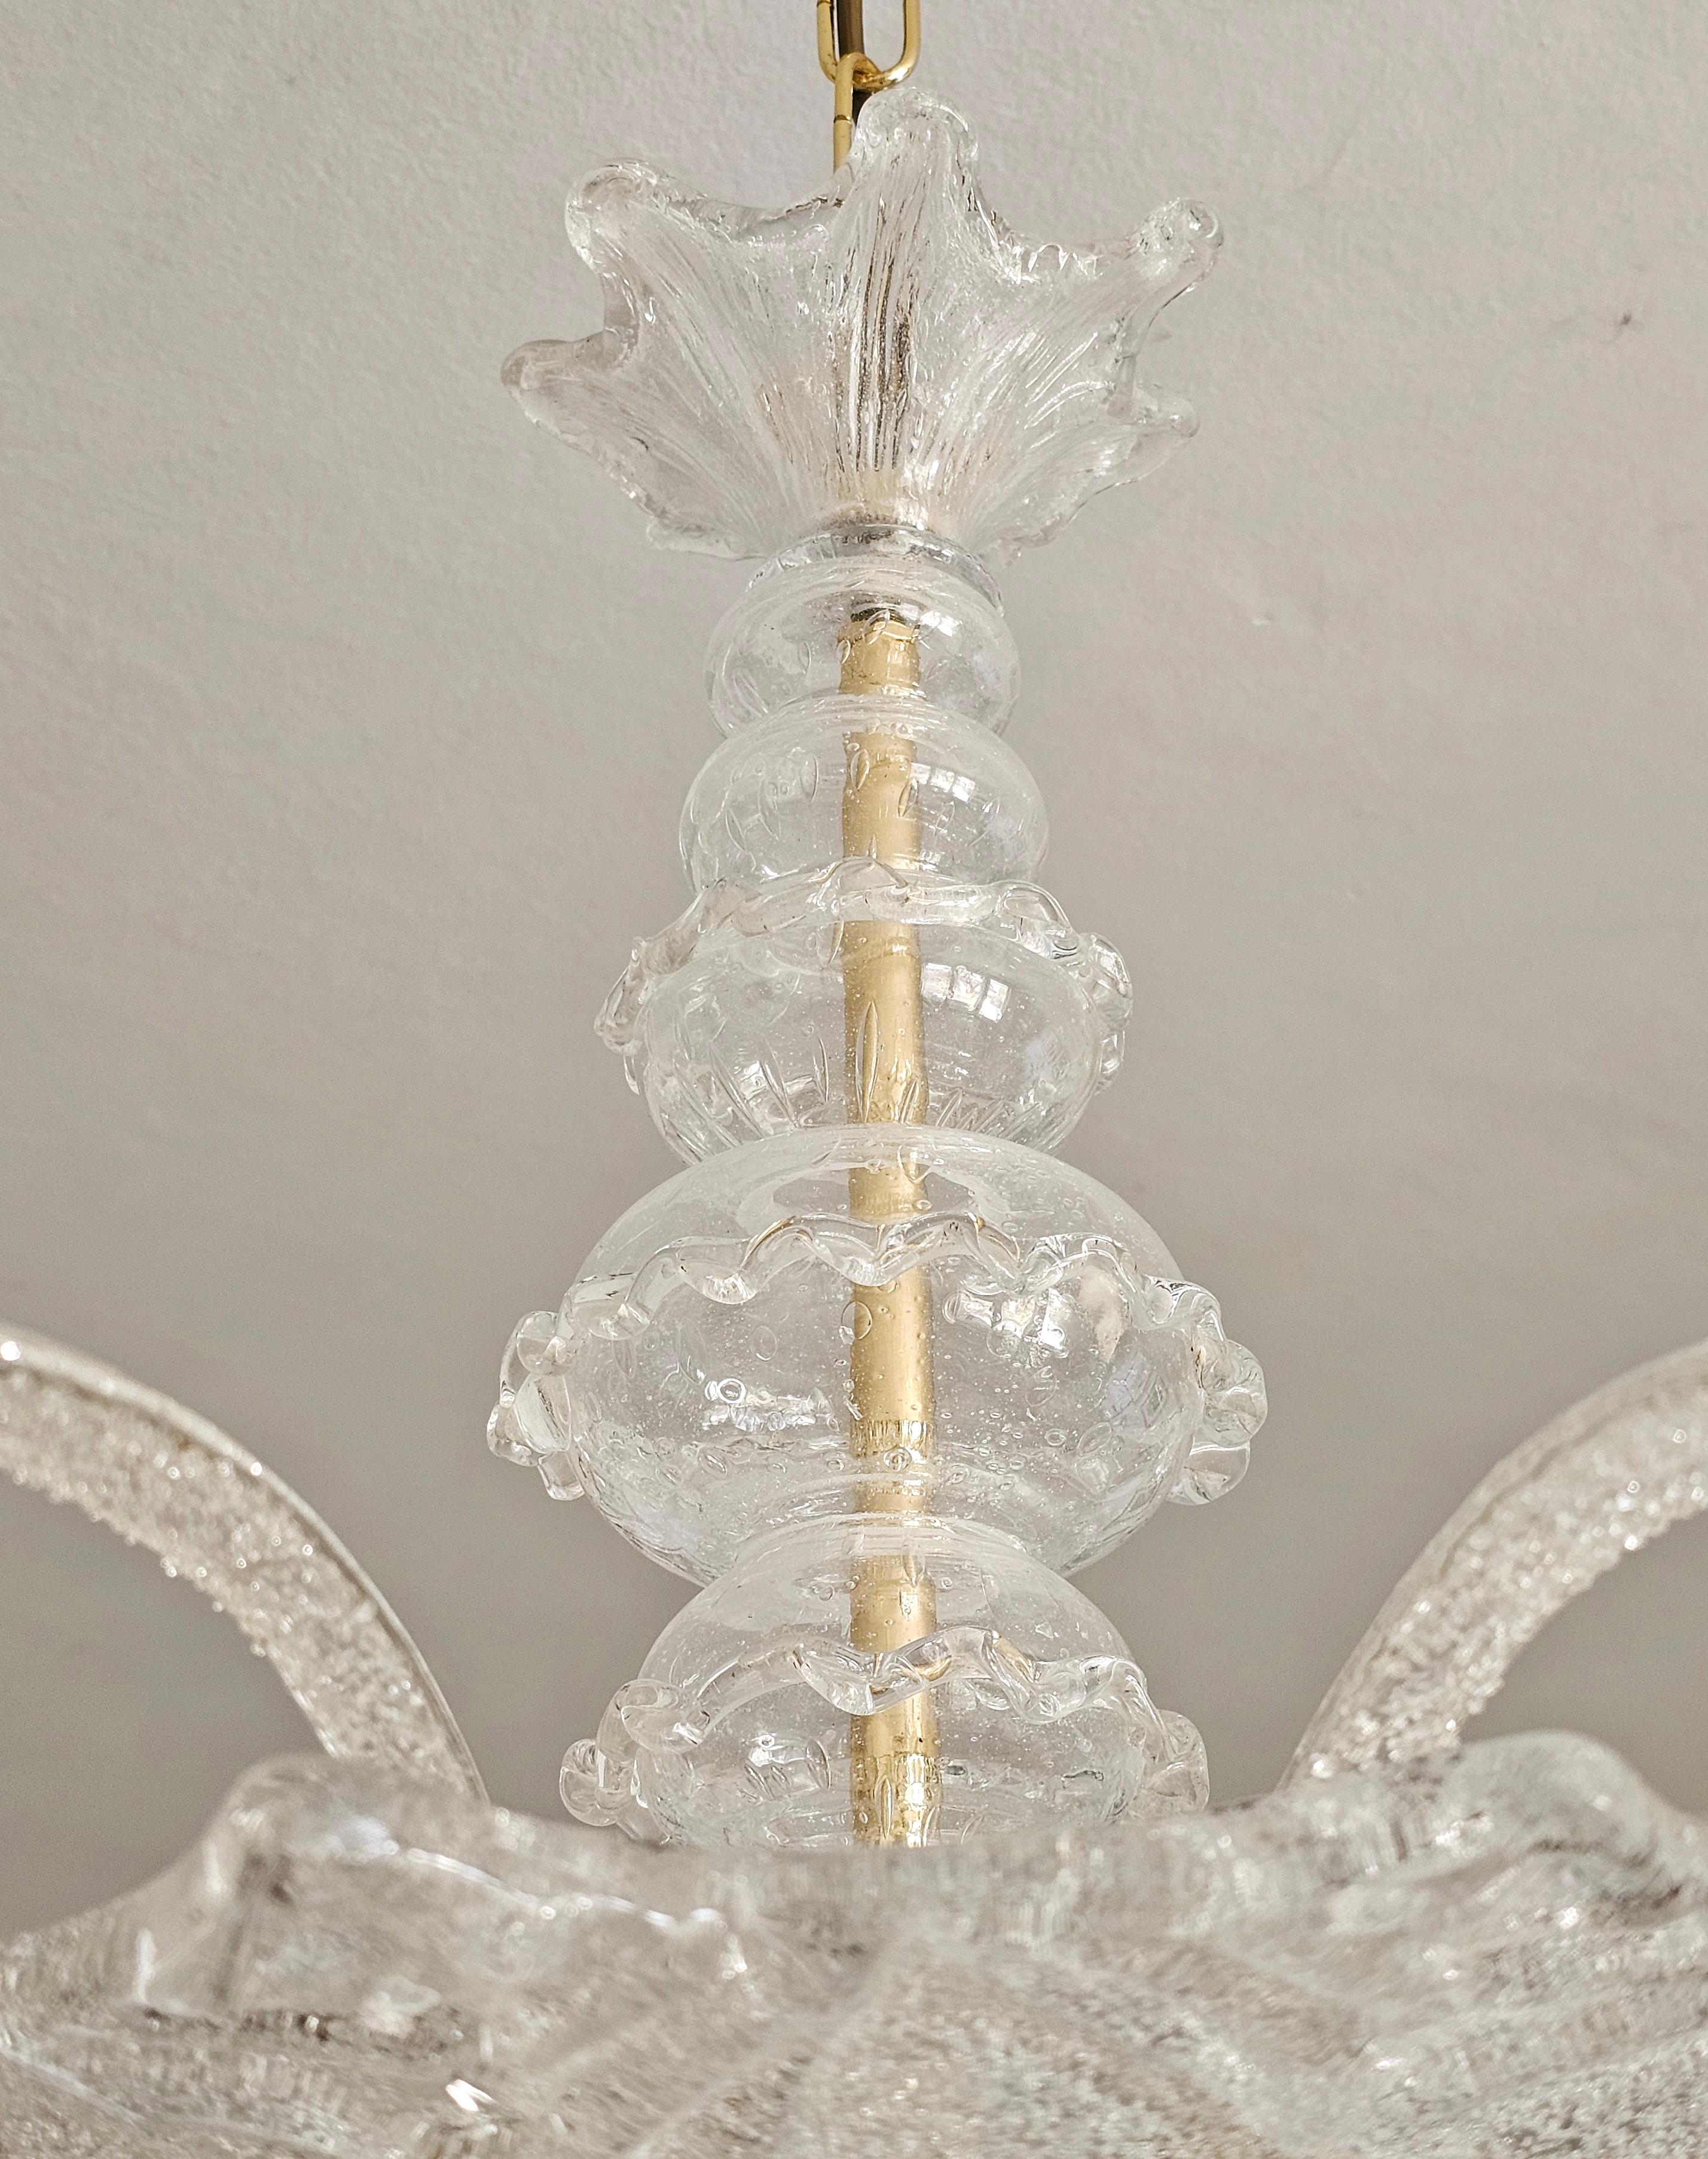 Art Deco Chandelier in style of Barovier & Toso, 10 Murano leaves, Italy 1950s For Sale 3